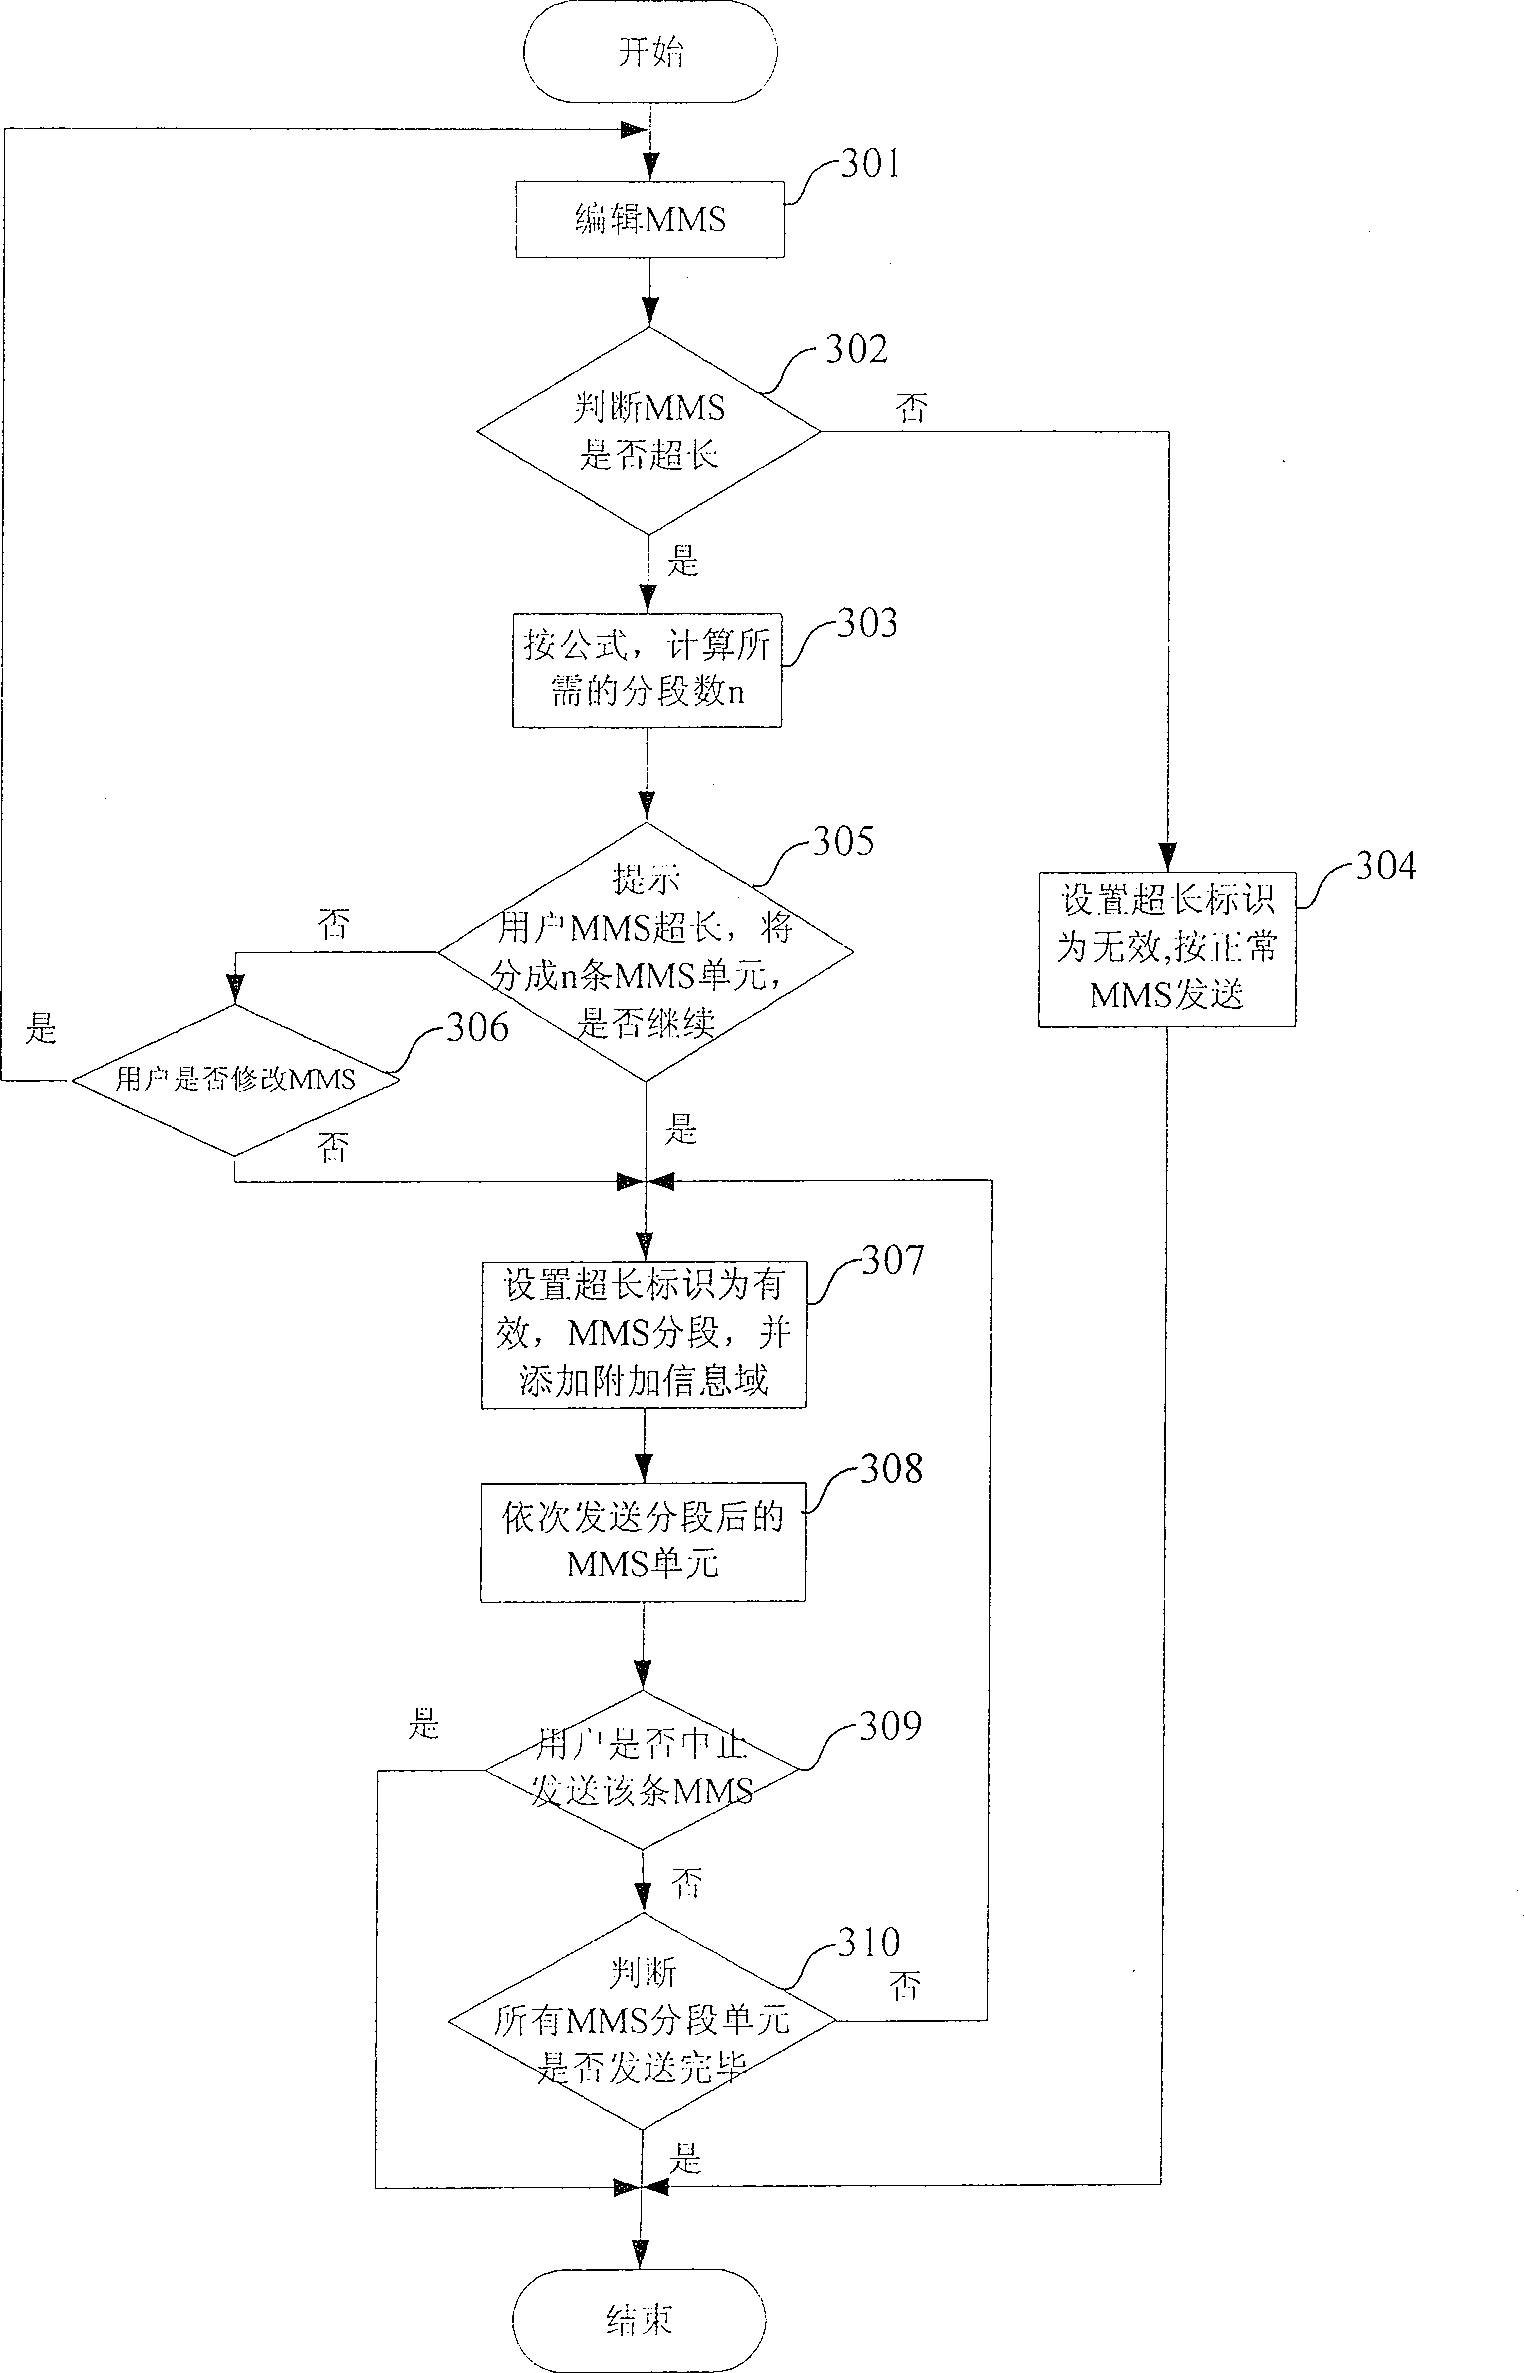 A method for receiving and sending multimedia information